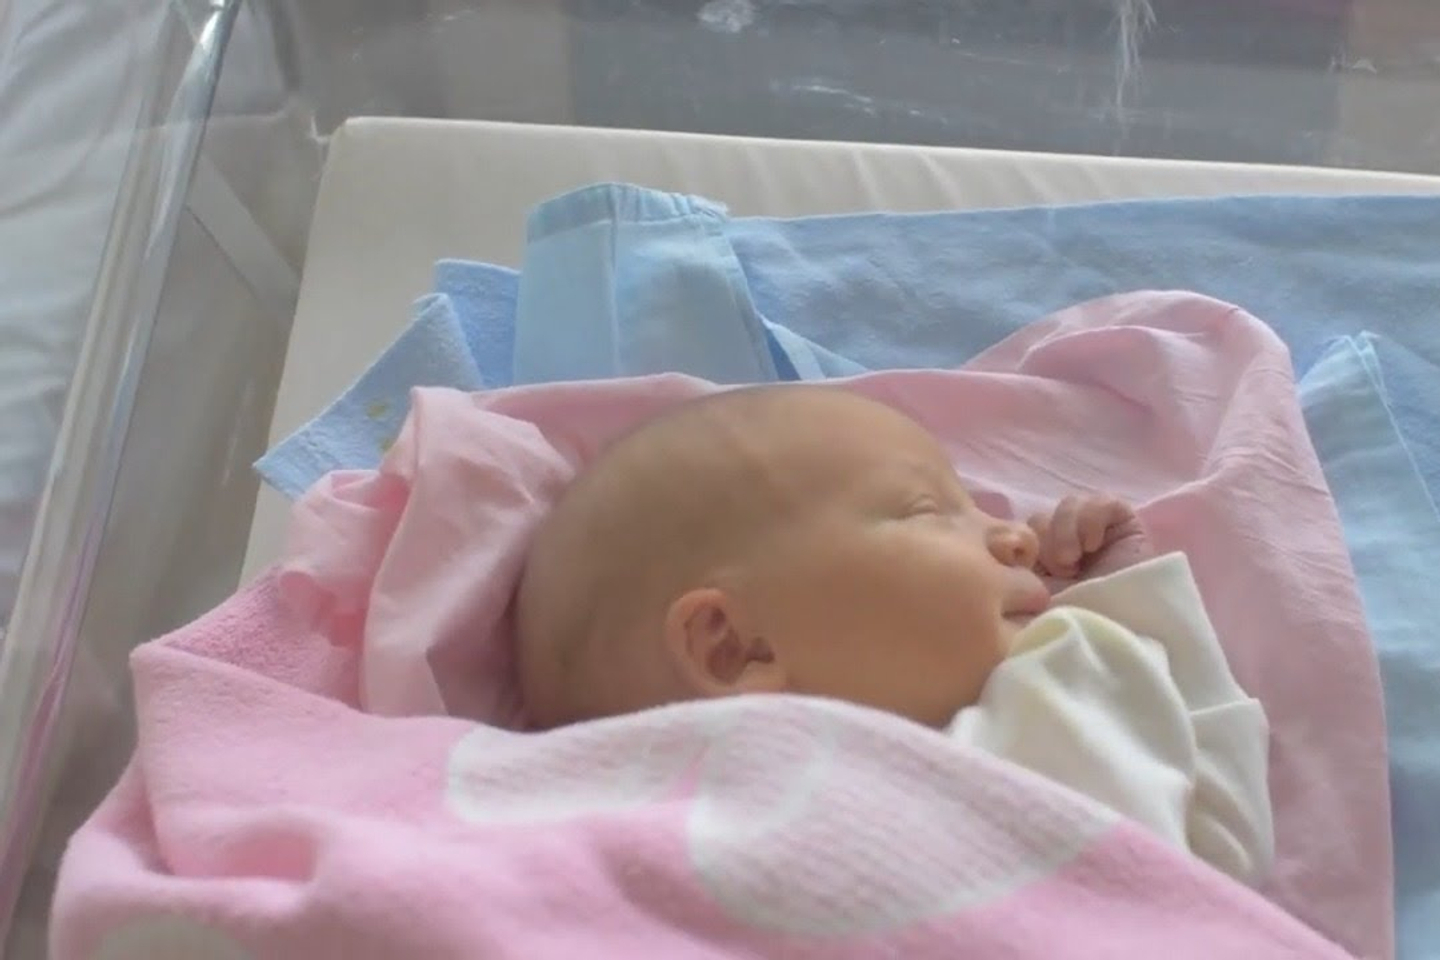 A baby smiles while sleeping in a hospital crib, swaddled in pink and blue blankets.